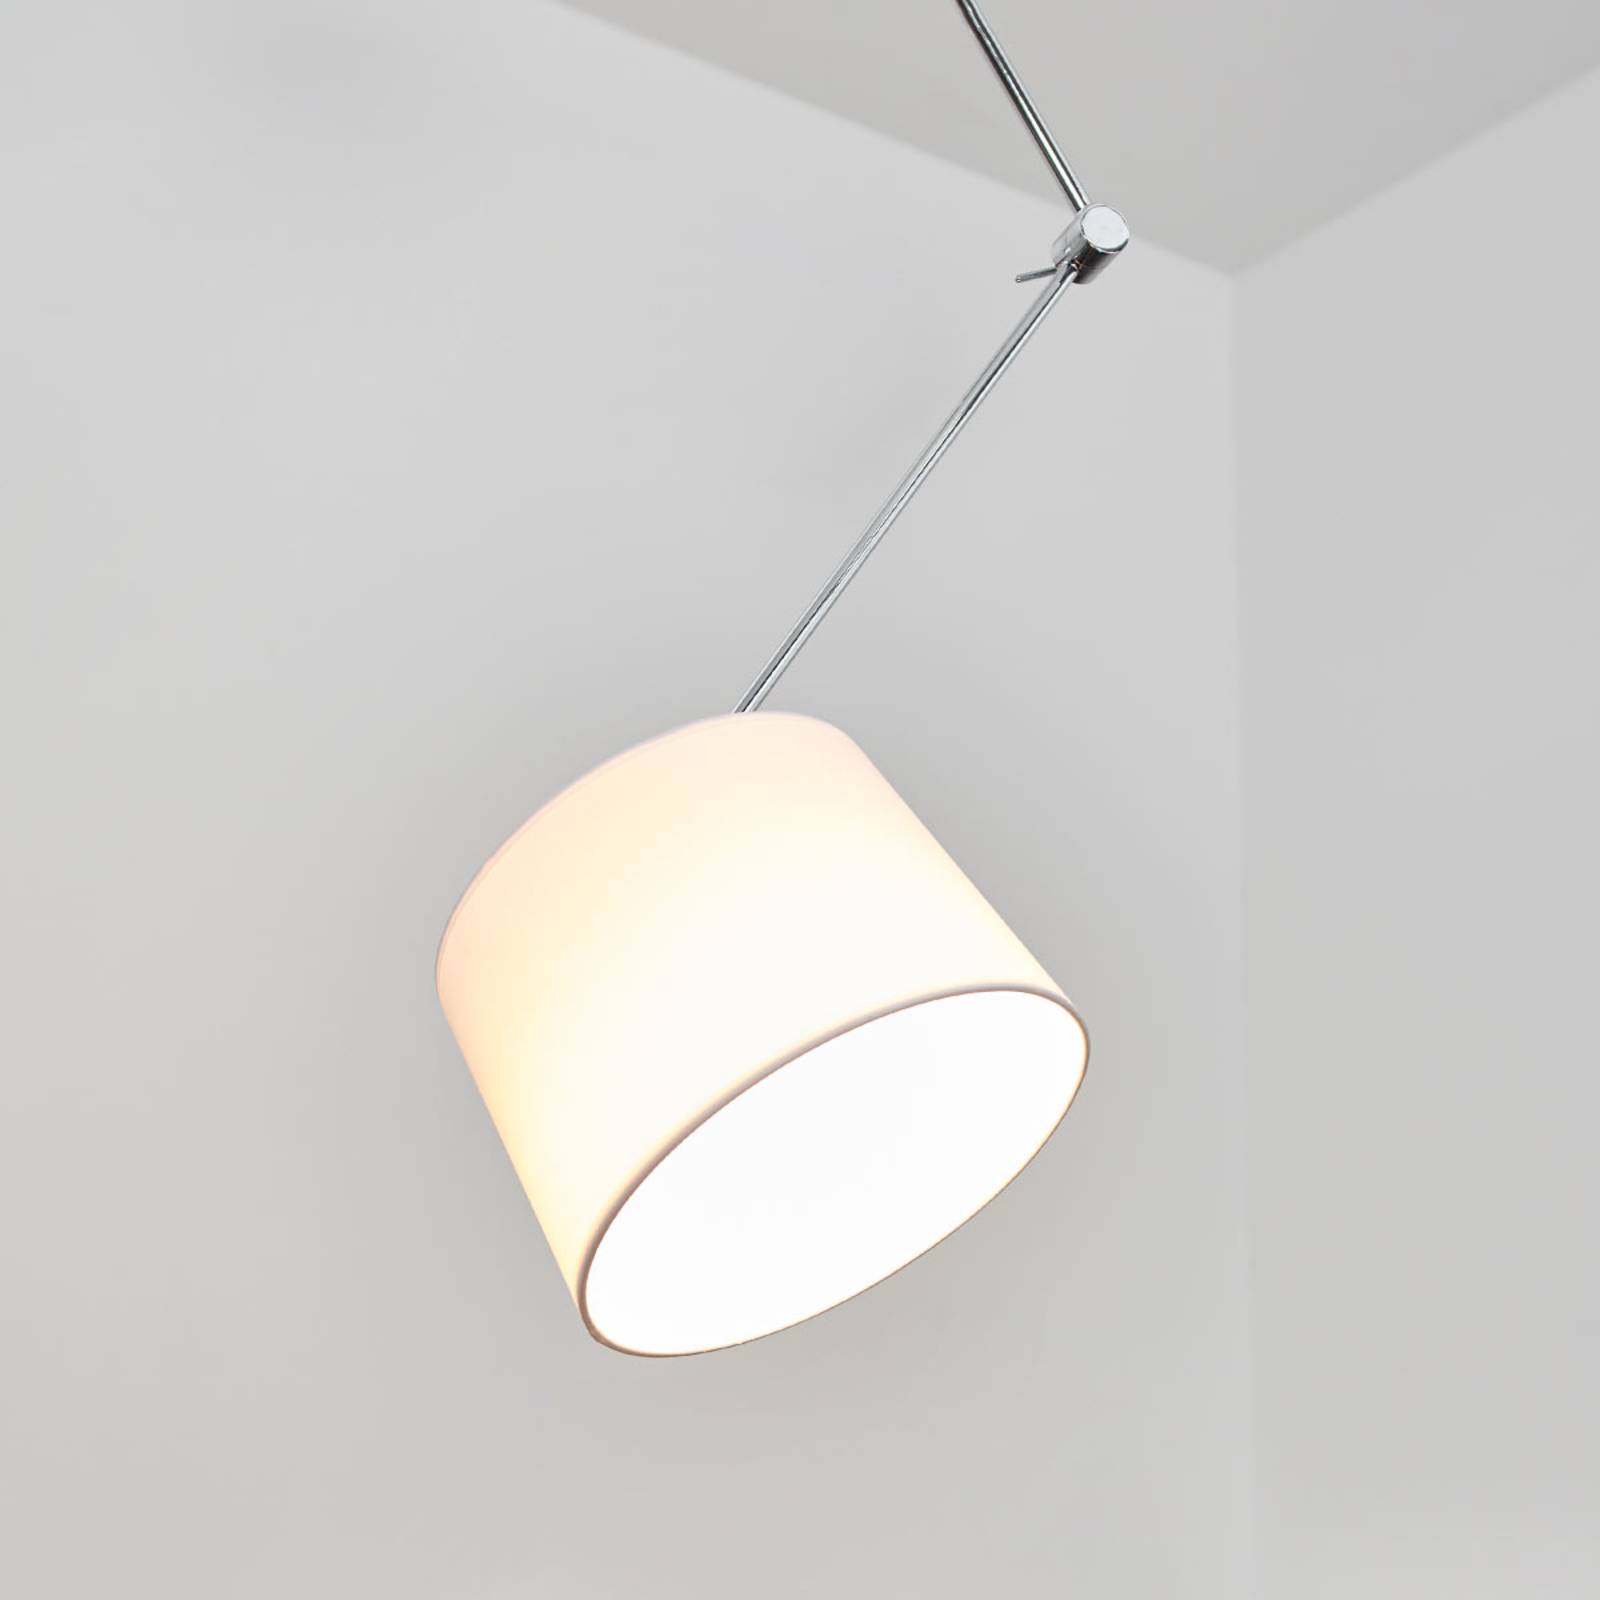 Photos - Chandelier / Lamp Lucande Fabric hanging light Jolla with cantilever arm 